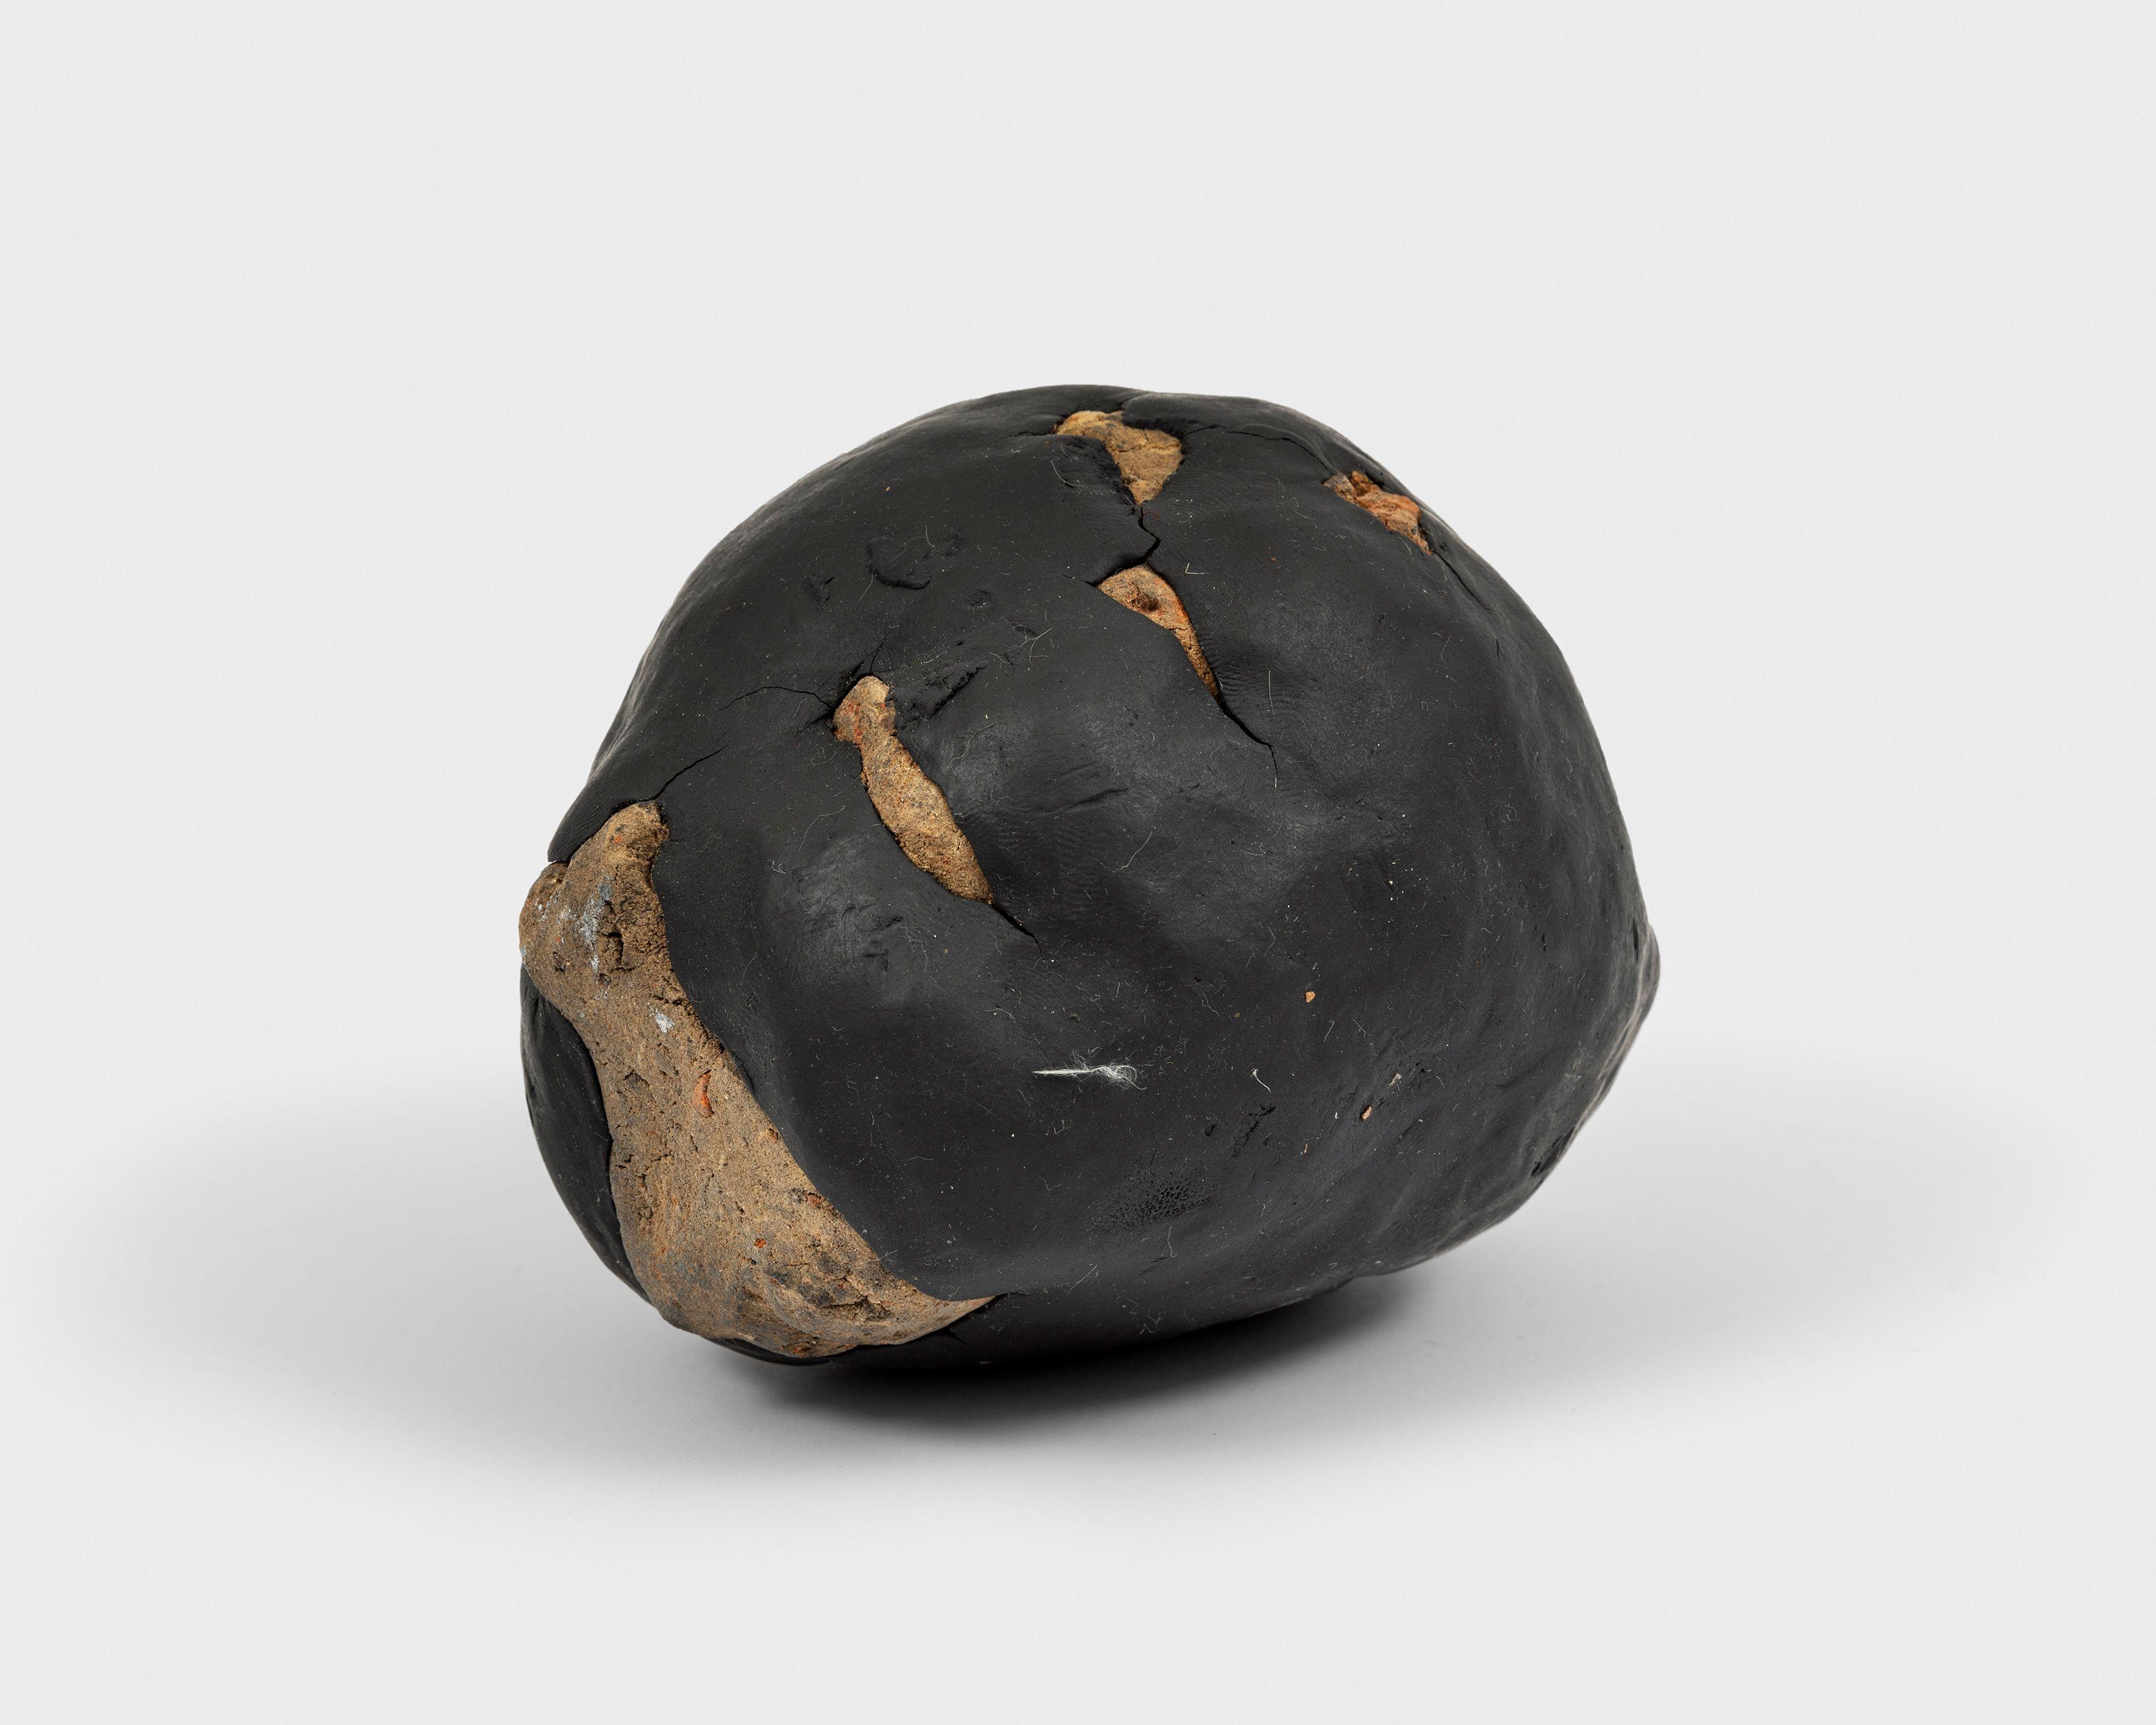 Model (Black Hand Holding Stone), from Working Table objects